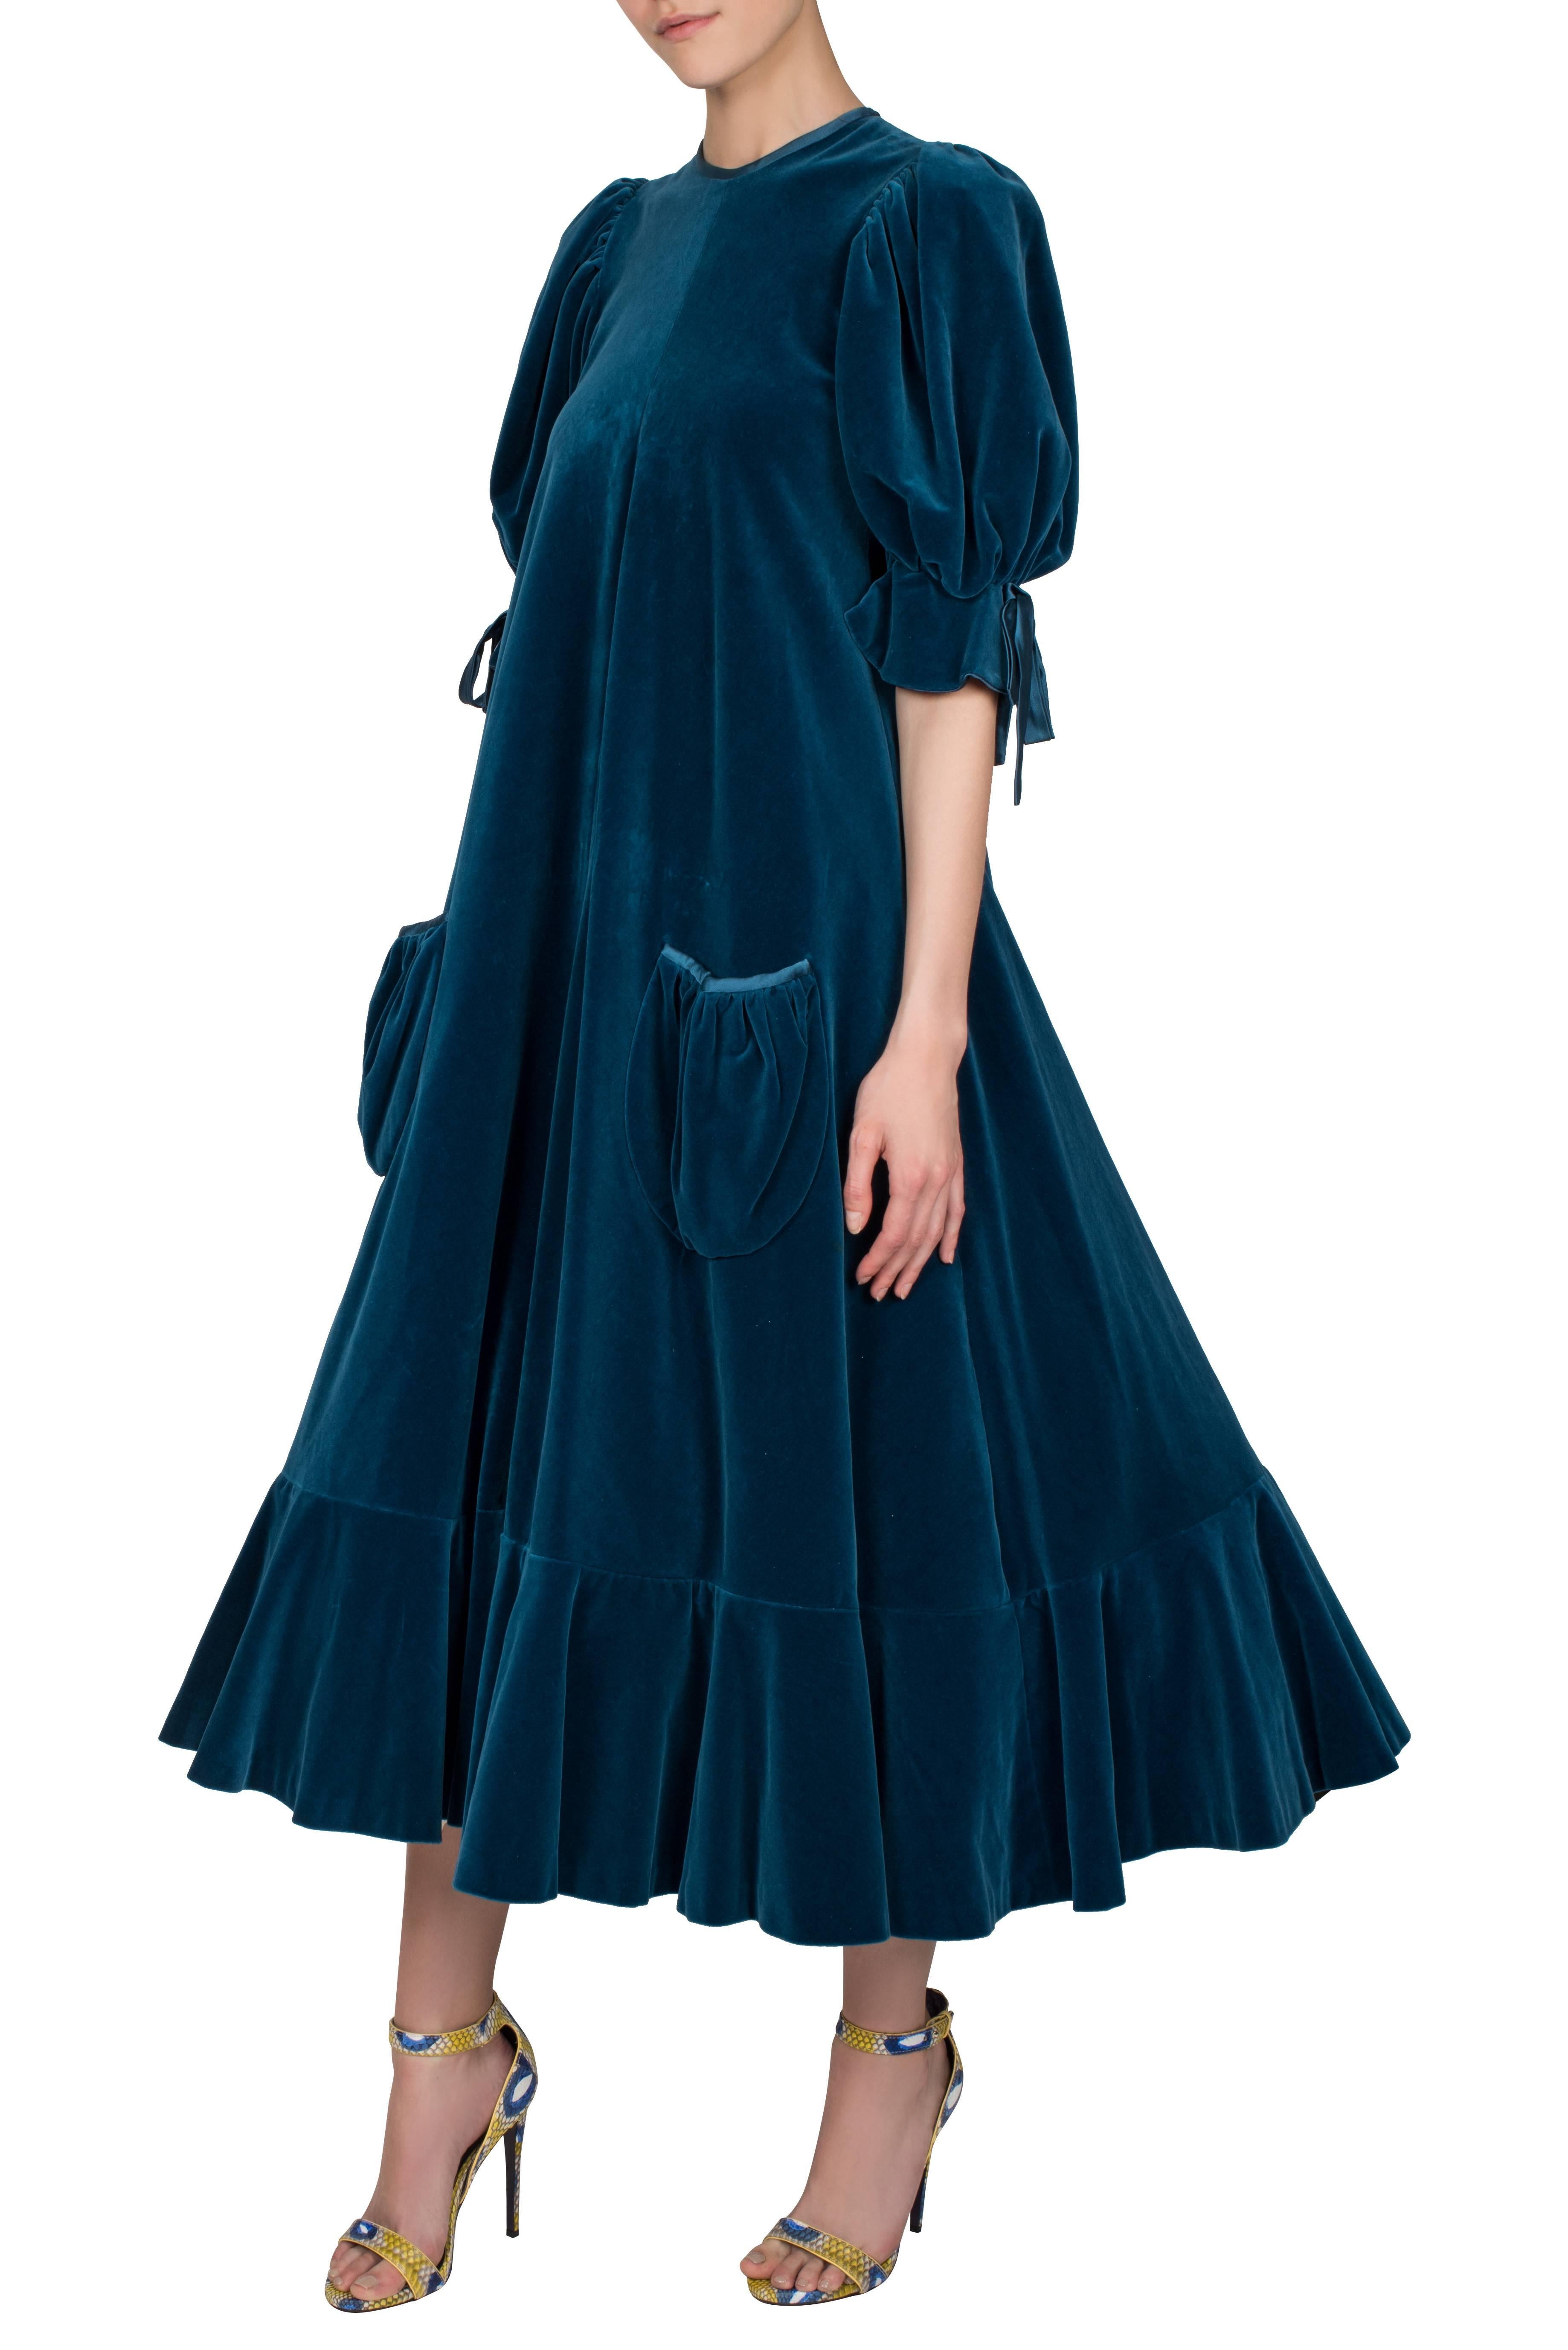 A rare Gina Fratini petroleum blue cotton velvet dress with puff sleeves and ivory lace-trimmed petticoat. This heavy full-length dress features a high round neckline, two gathered pouch silk-trimmed pockets on the hips and elbow-length puff sleeves